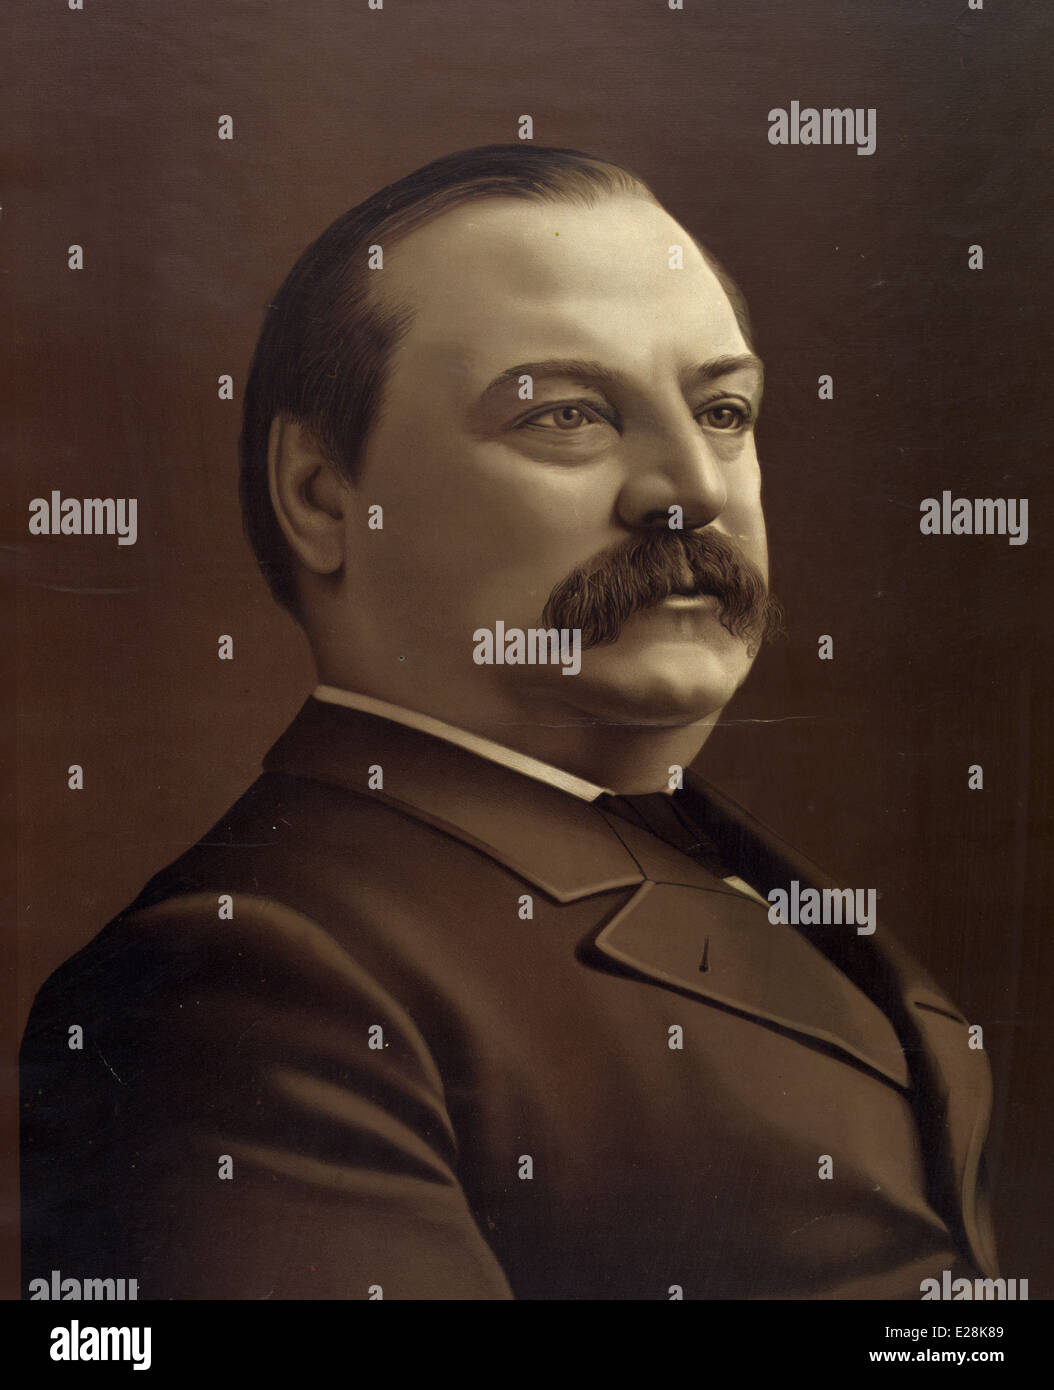 Stephen Grover Cleveland, 22nd and 24th President of the United States of America Stock Photo